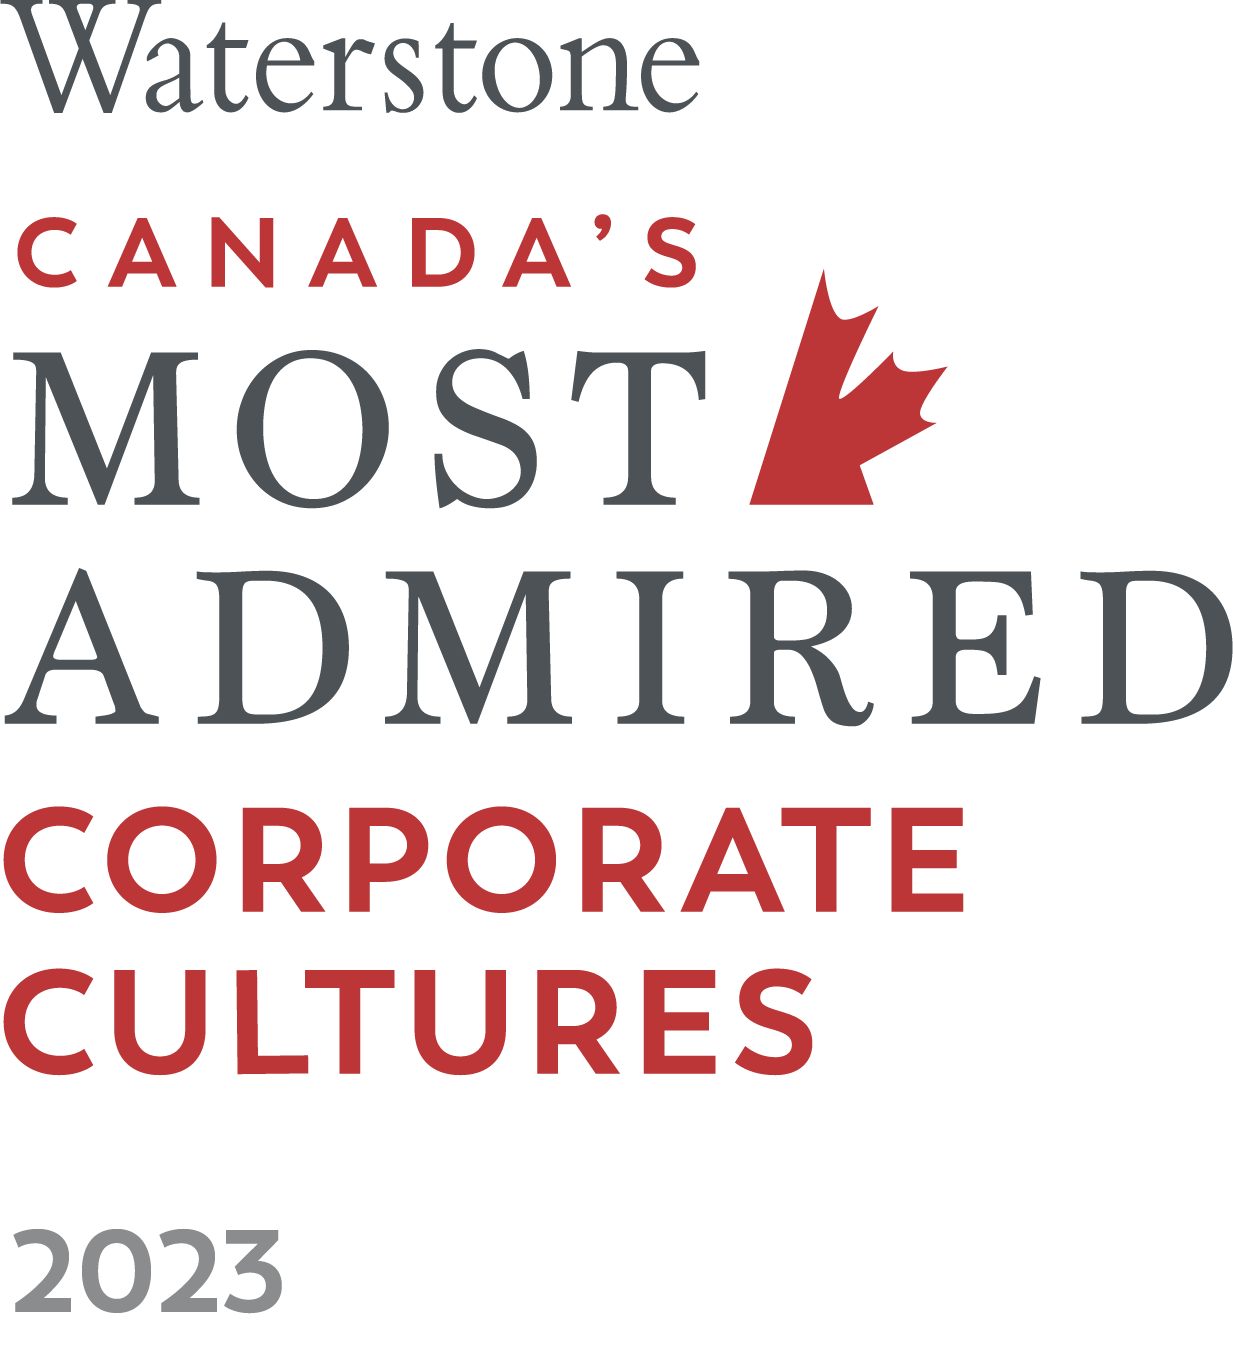 Waterstone Canada's Most Admired Corporate Cultures 2023